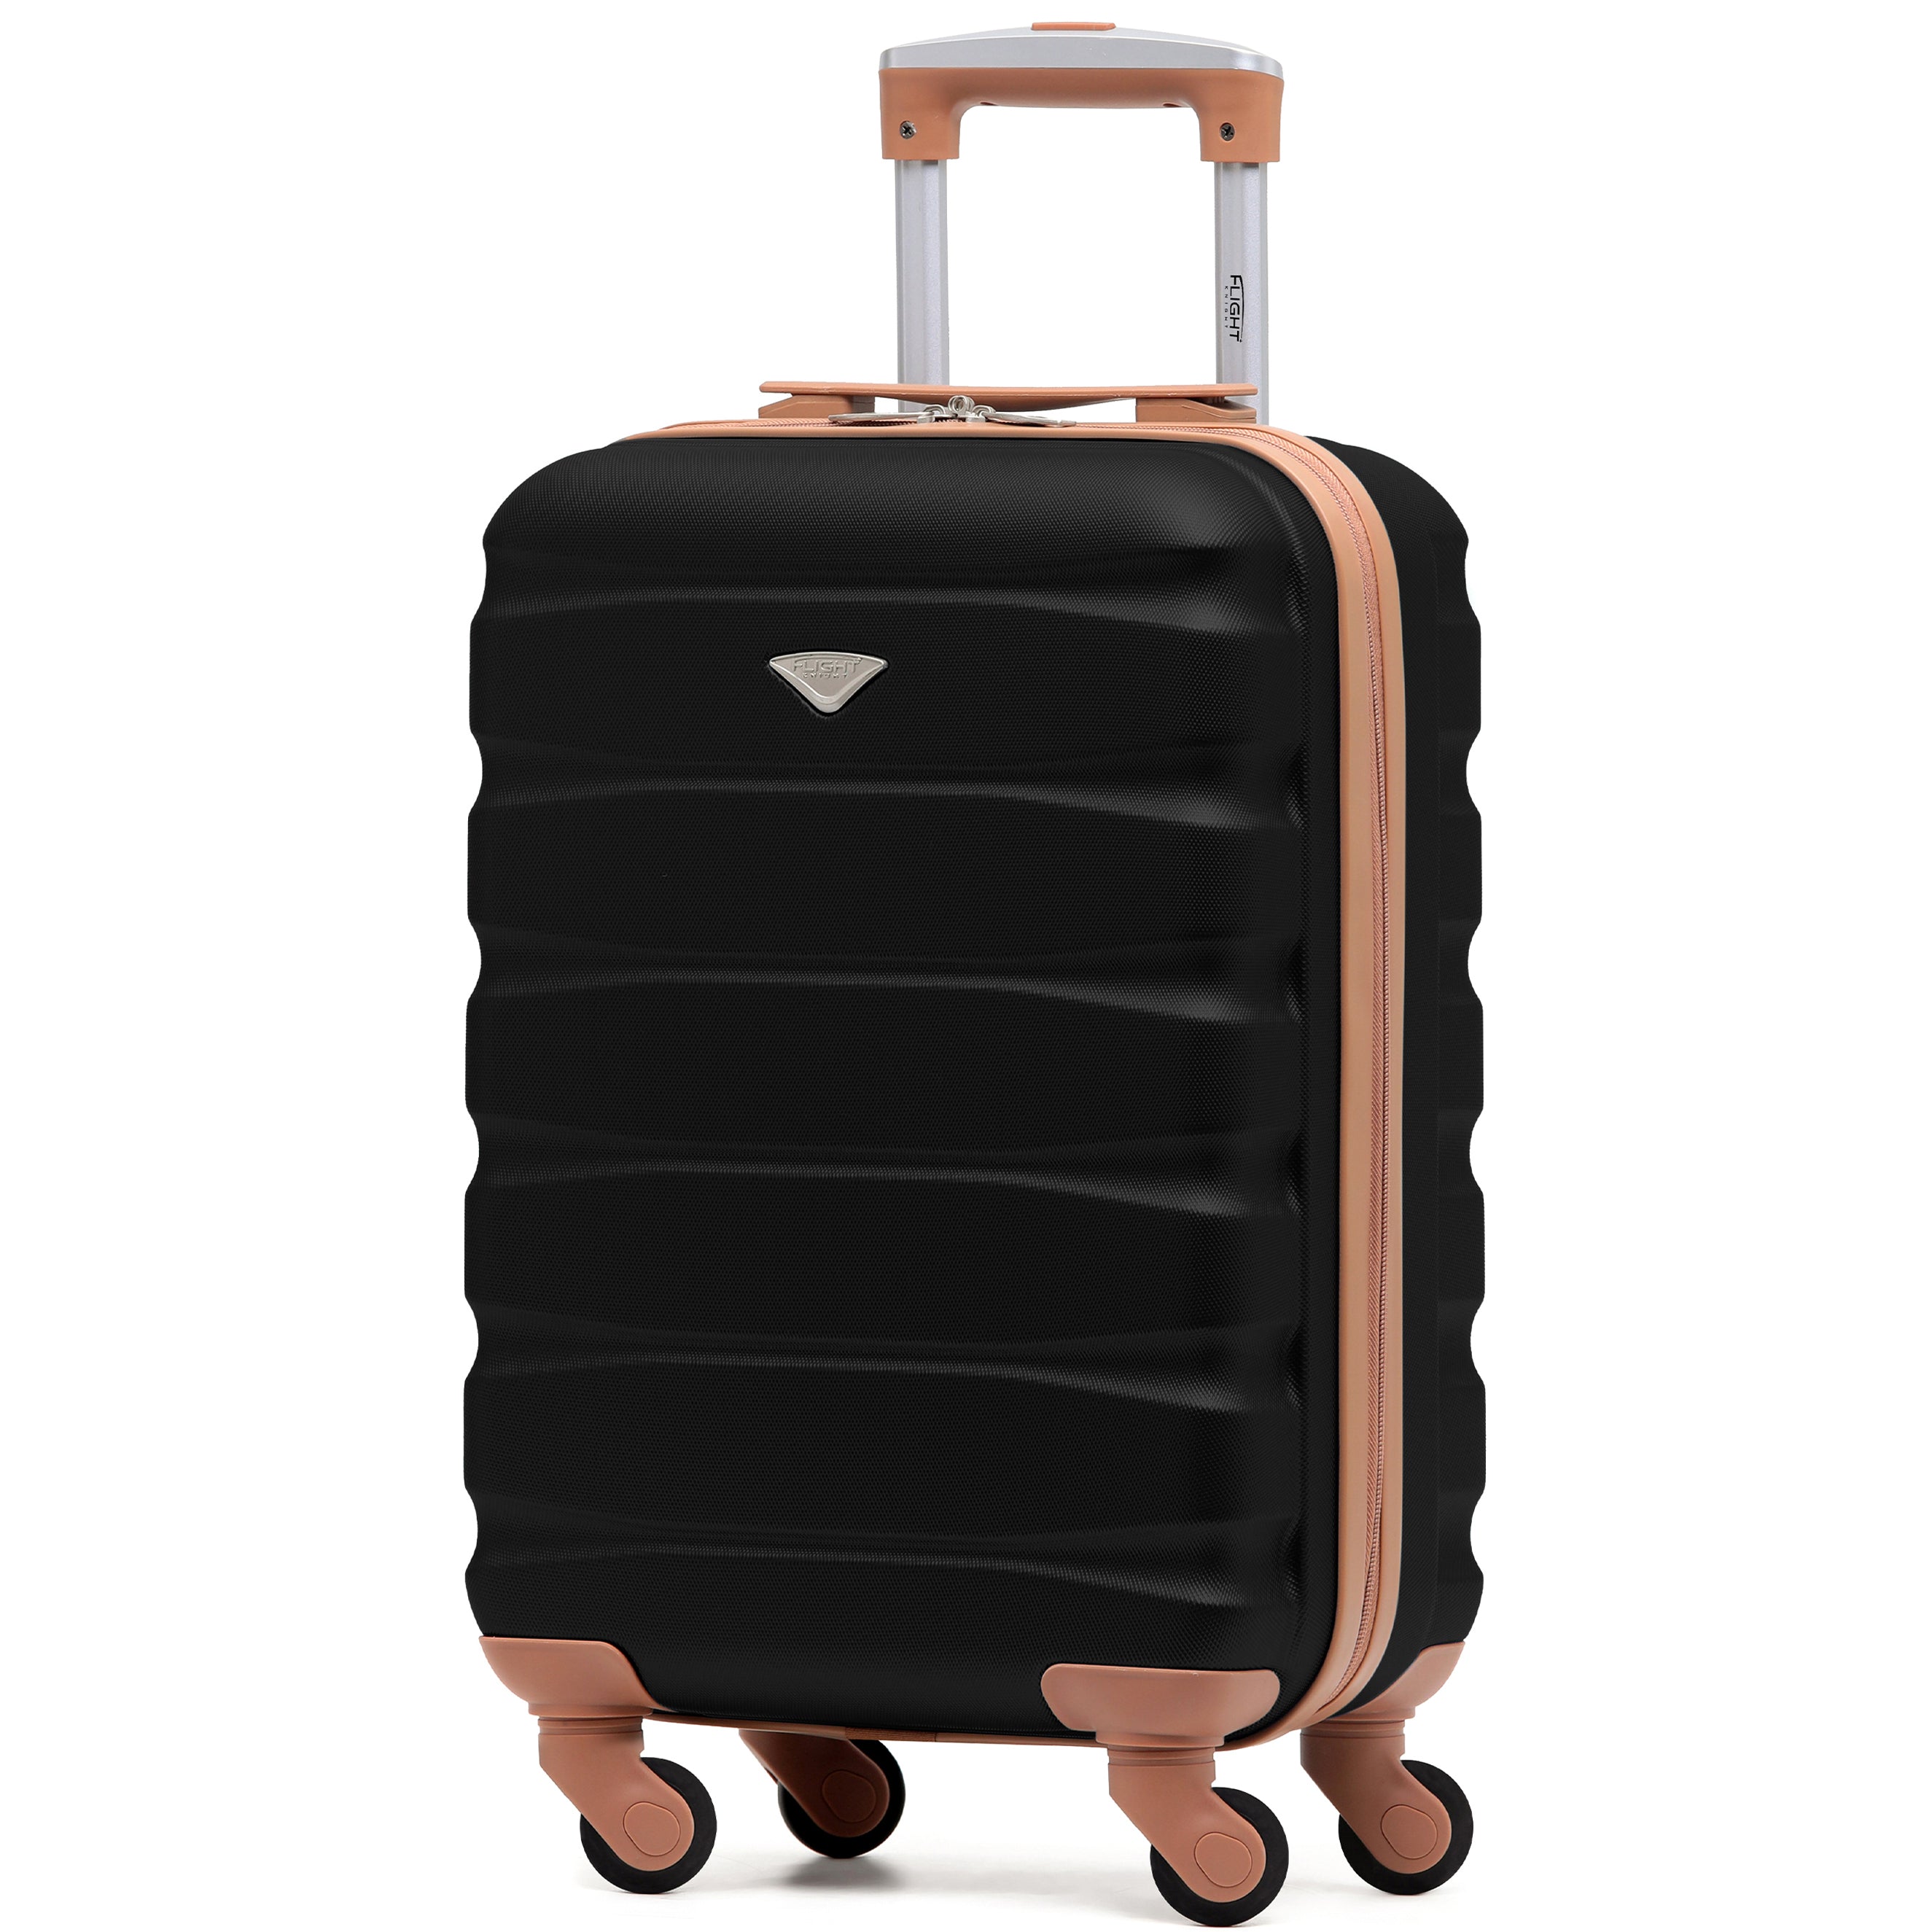 SAFIR Upgraded - 55x35x20cm 4 Wheel ABS Hard Case Suitcases Cabin & Hold Luggagee